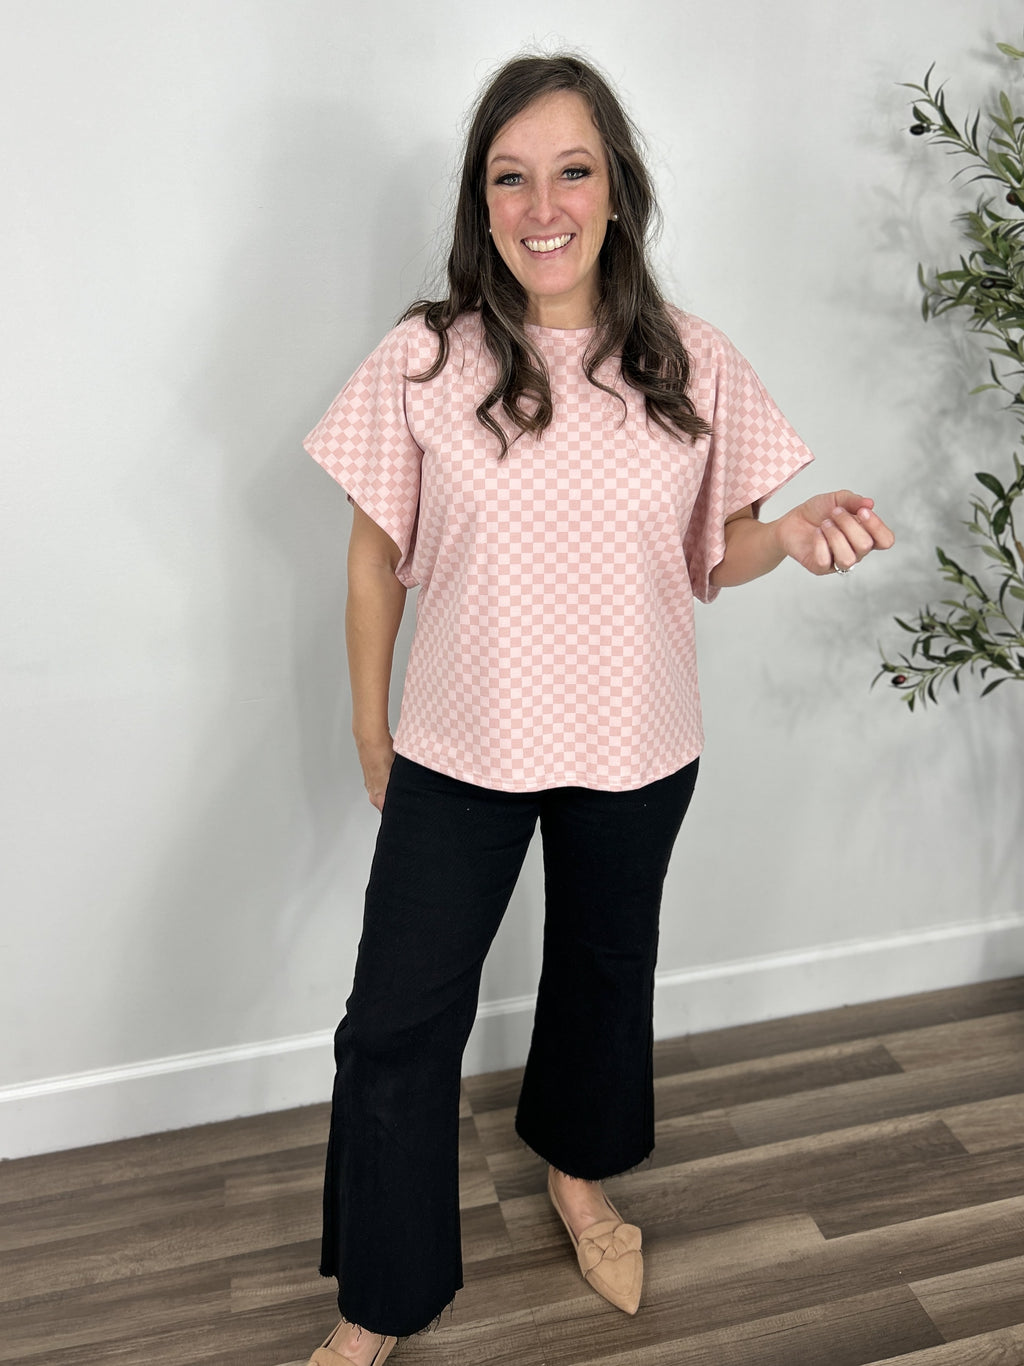 Claire two tone pink checker dolman sleeve top paired with black crop pants and light taupe flats. 